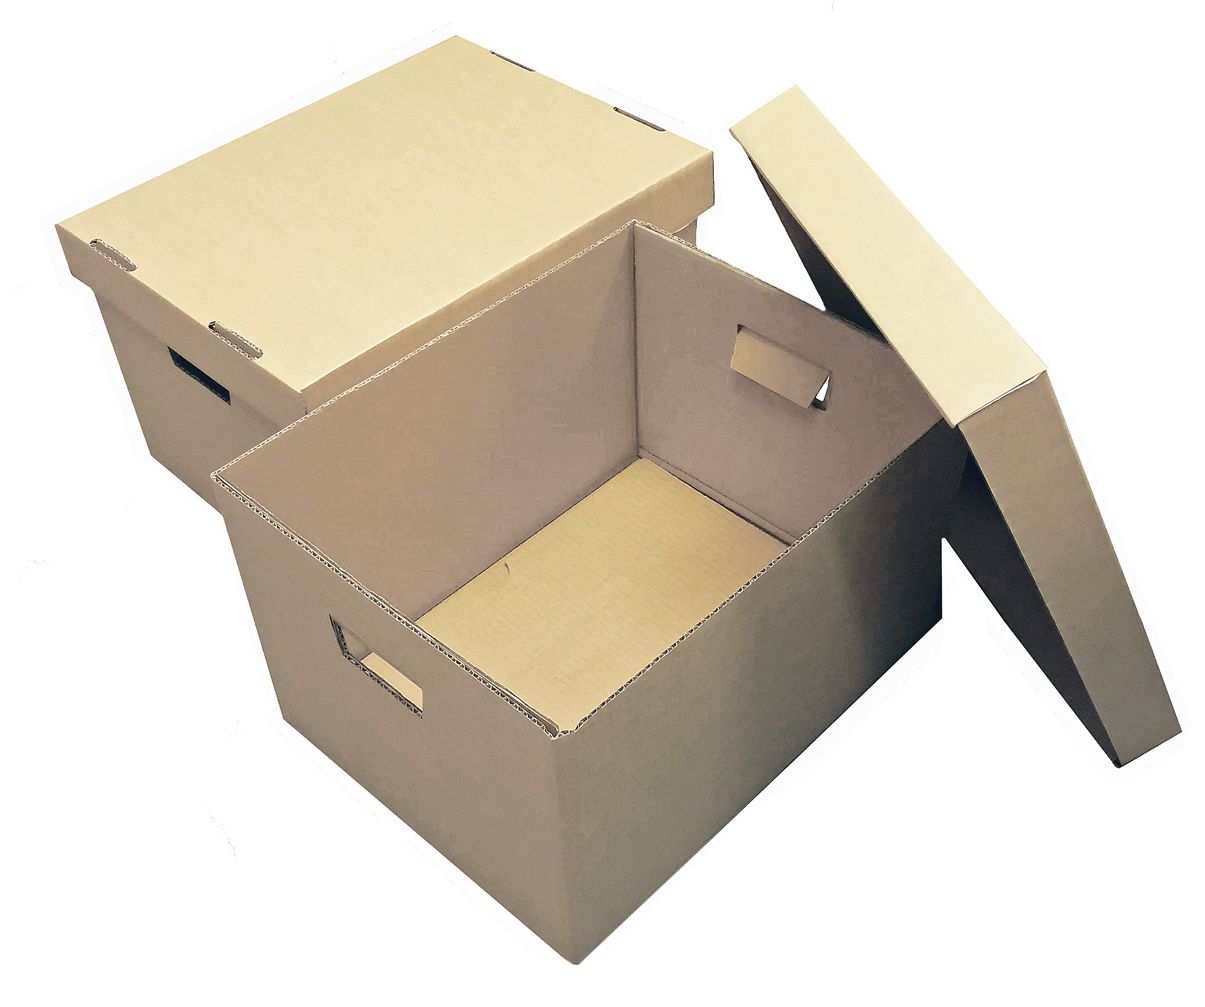 Archive boxes | Packaging2Buy | storage boxes with base & lid